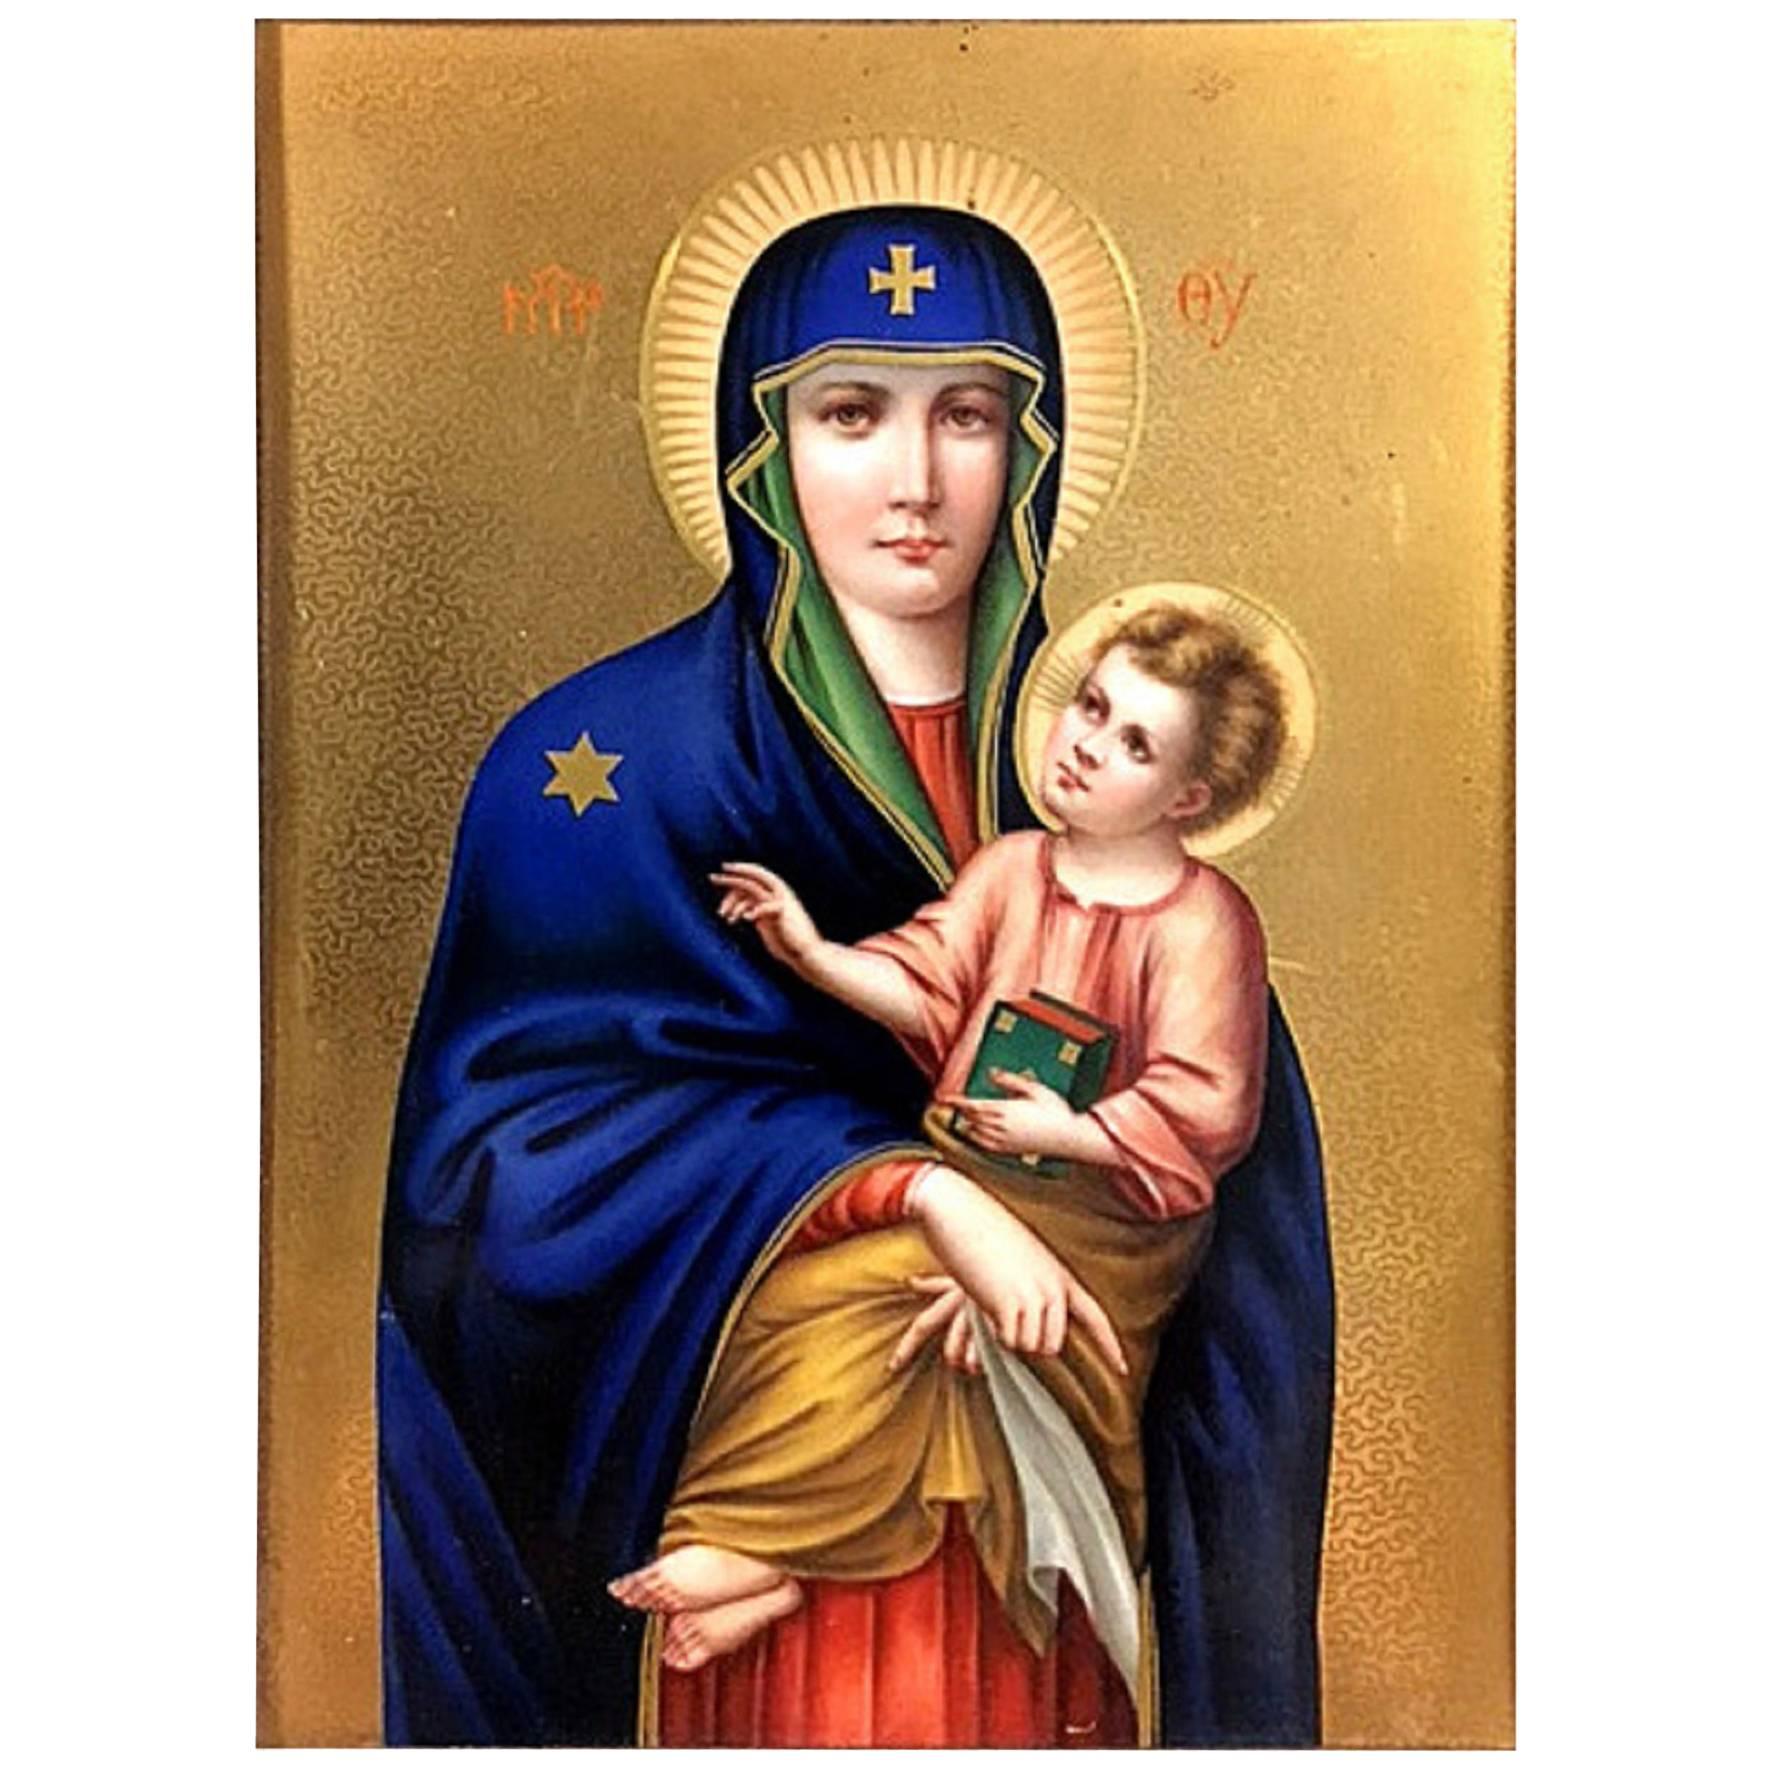 KPM Porcelain Plaque, Mary and Child as an Orthodox Icon, Berlin, circa 1880 For Sale